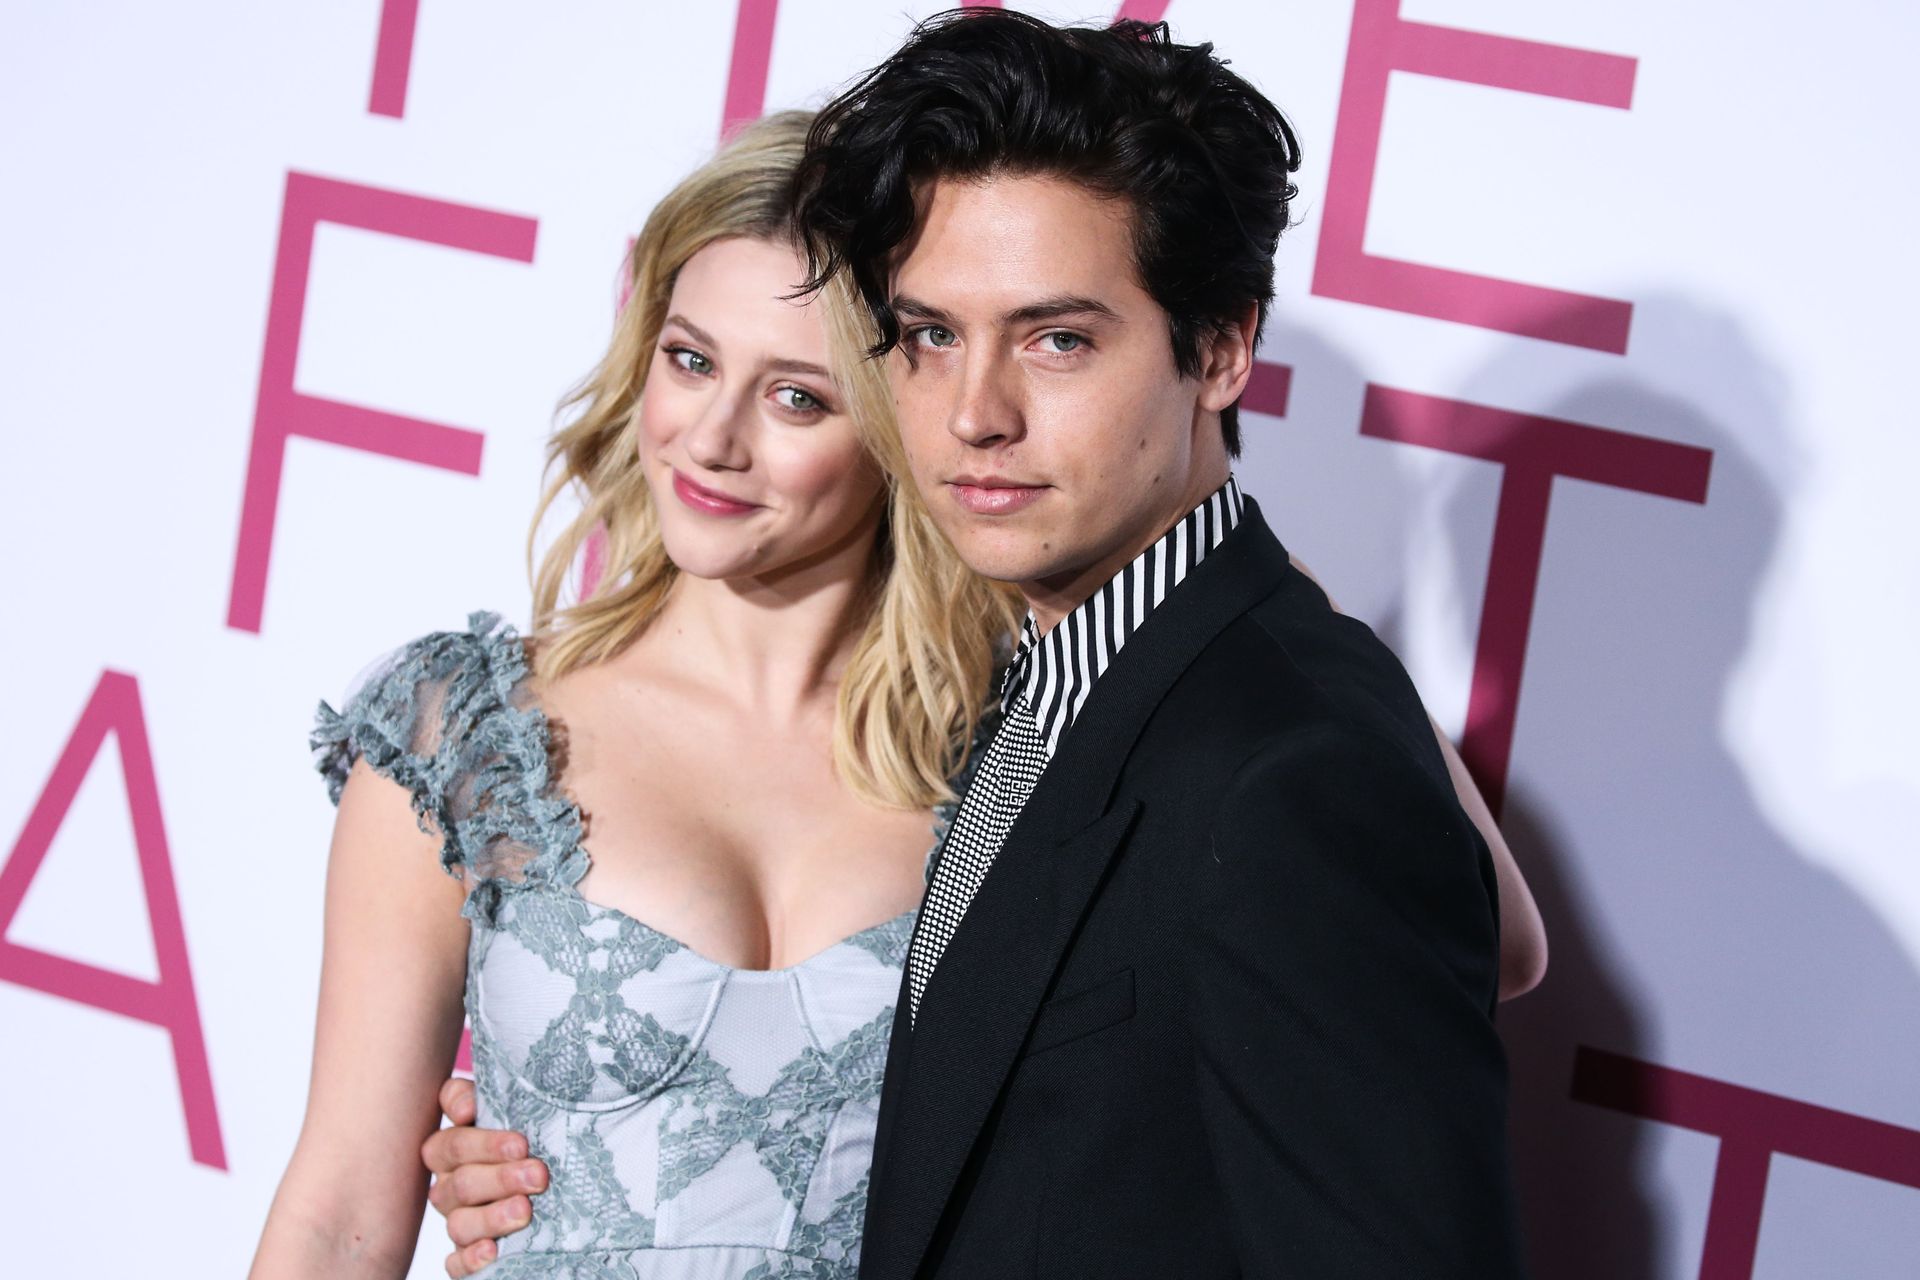 Cole Sprouse  Lili Reinhart Break Up Again Less Than a Year After Reconciliation (5 Photos)